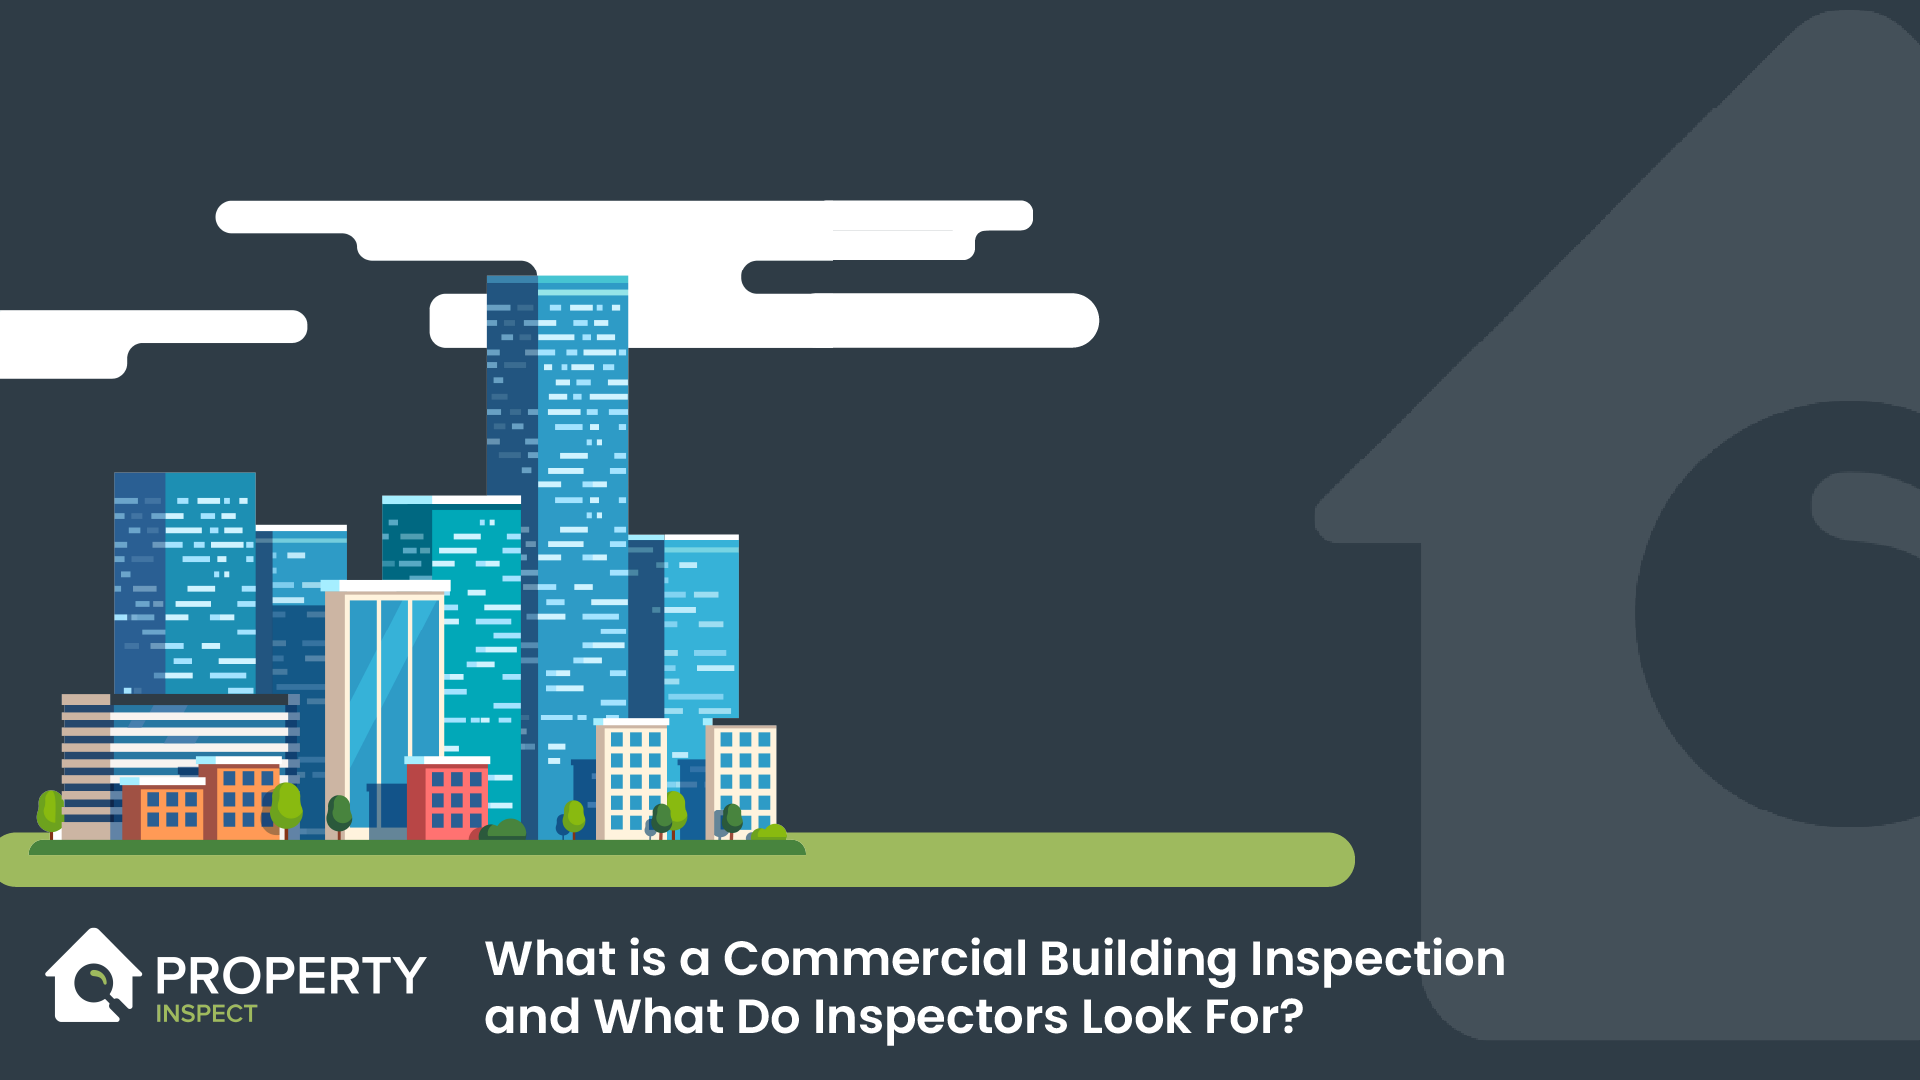 What is a Commercial Building Inspection and What Do Inspectors Look For?